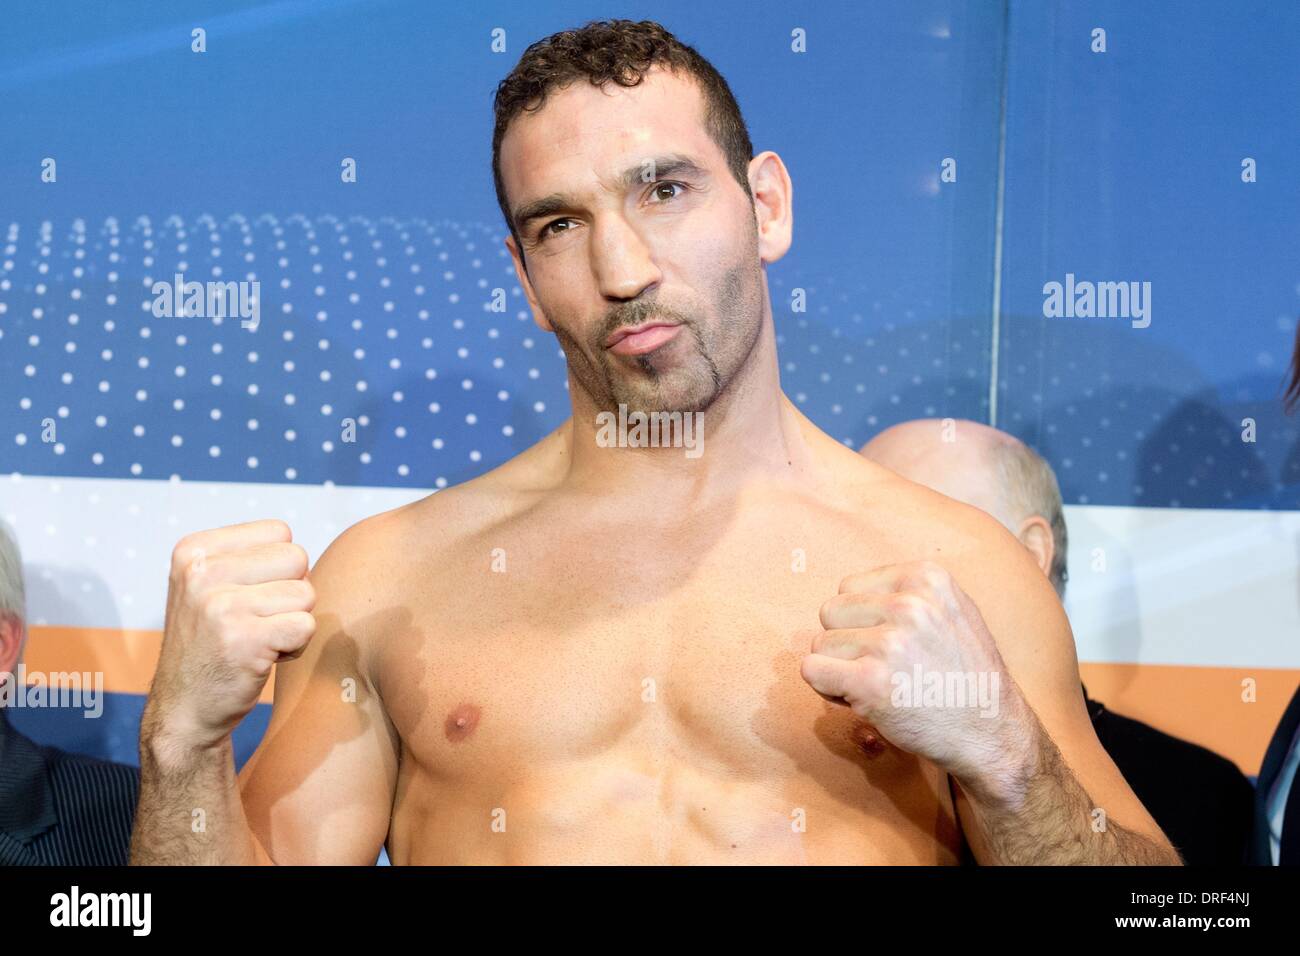 Stuttgart, Germany. 24th Jan, 2014. Boxer Firat Arslan poses during the official weighing in Stuttgart, Germany, 24 January 2014. The WBO Cruiserweight Championship bout against Marco Huck will take place on 25 January. Photo: SEBASTIAN KAHNERT/dpa/Alamy Live News Stock Photo